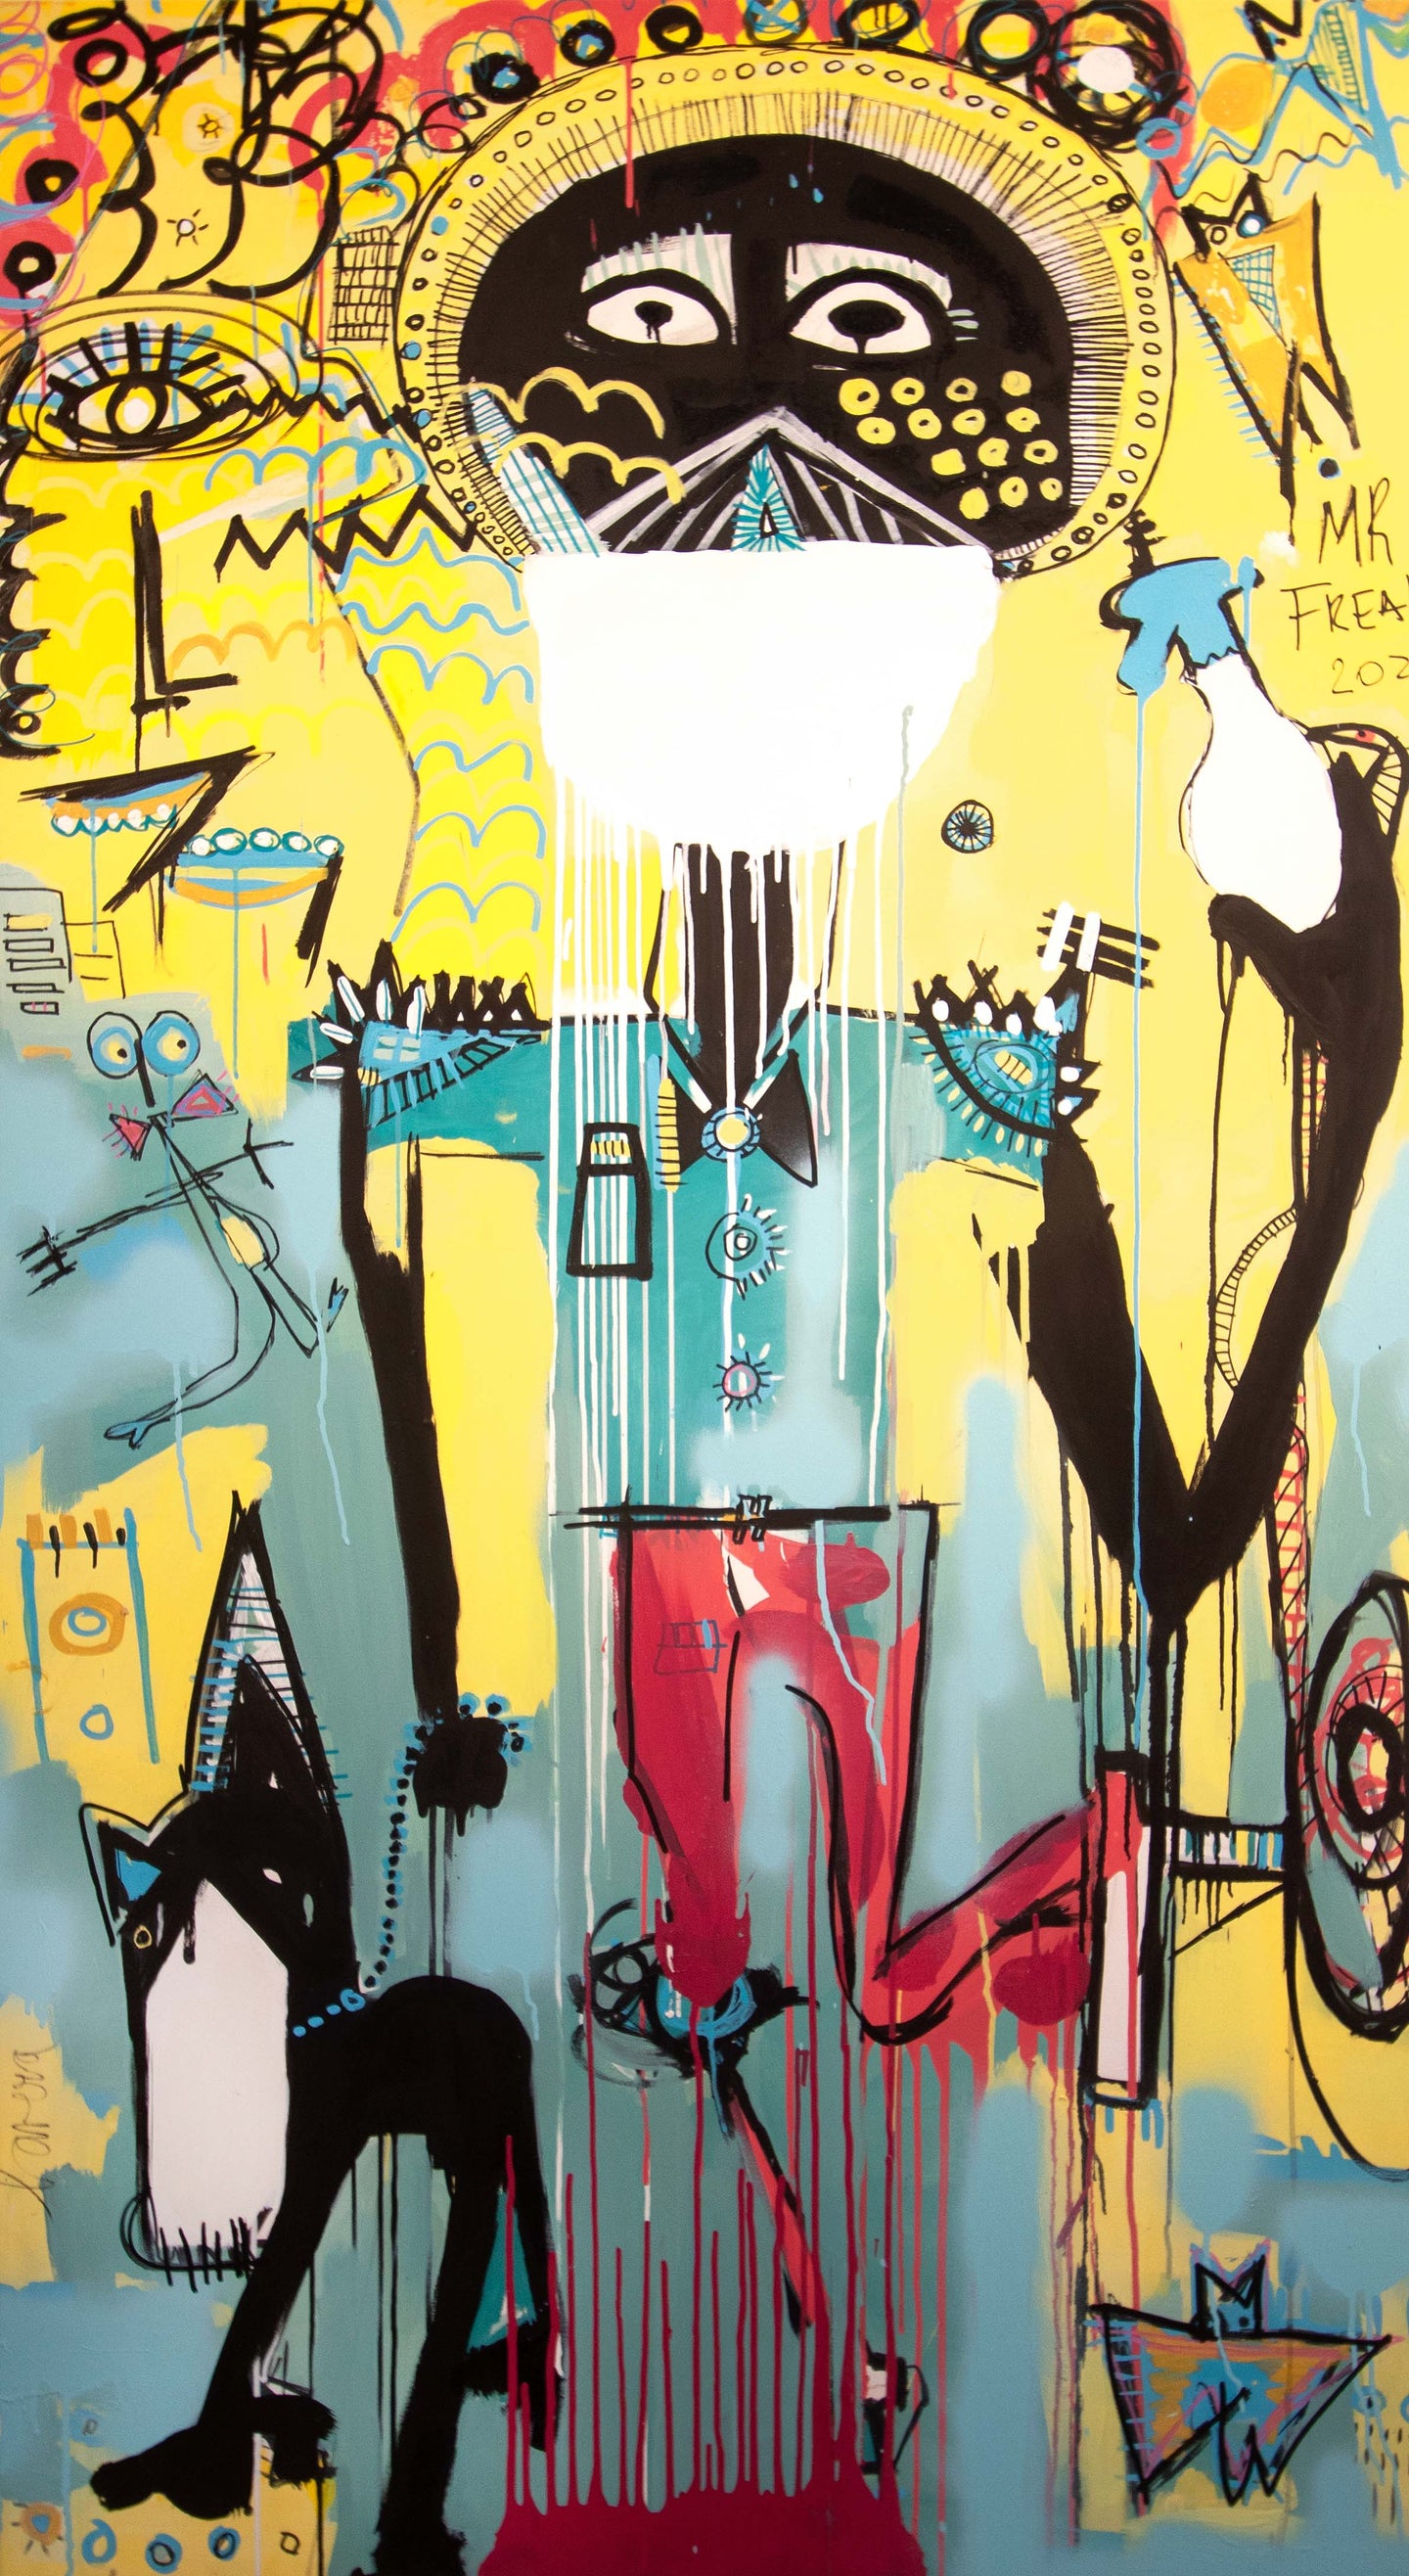 Argentinian artist Fernanda Lavera, Mr Freak, 2020, 79 x 43 inches, Acrylic and Oil on canvas, Graffiti and Street Art for Sale at Manolis Projects Art Gallery